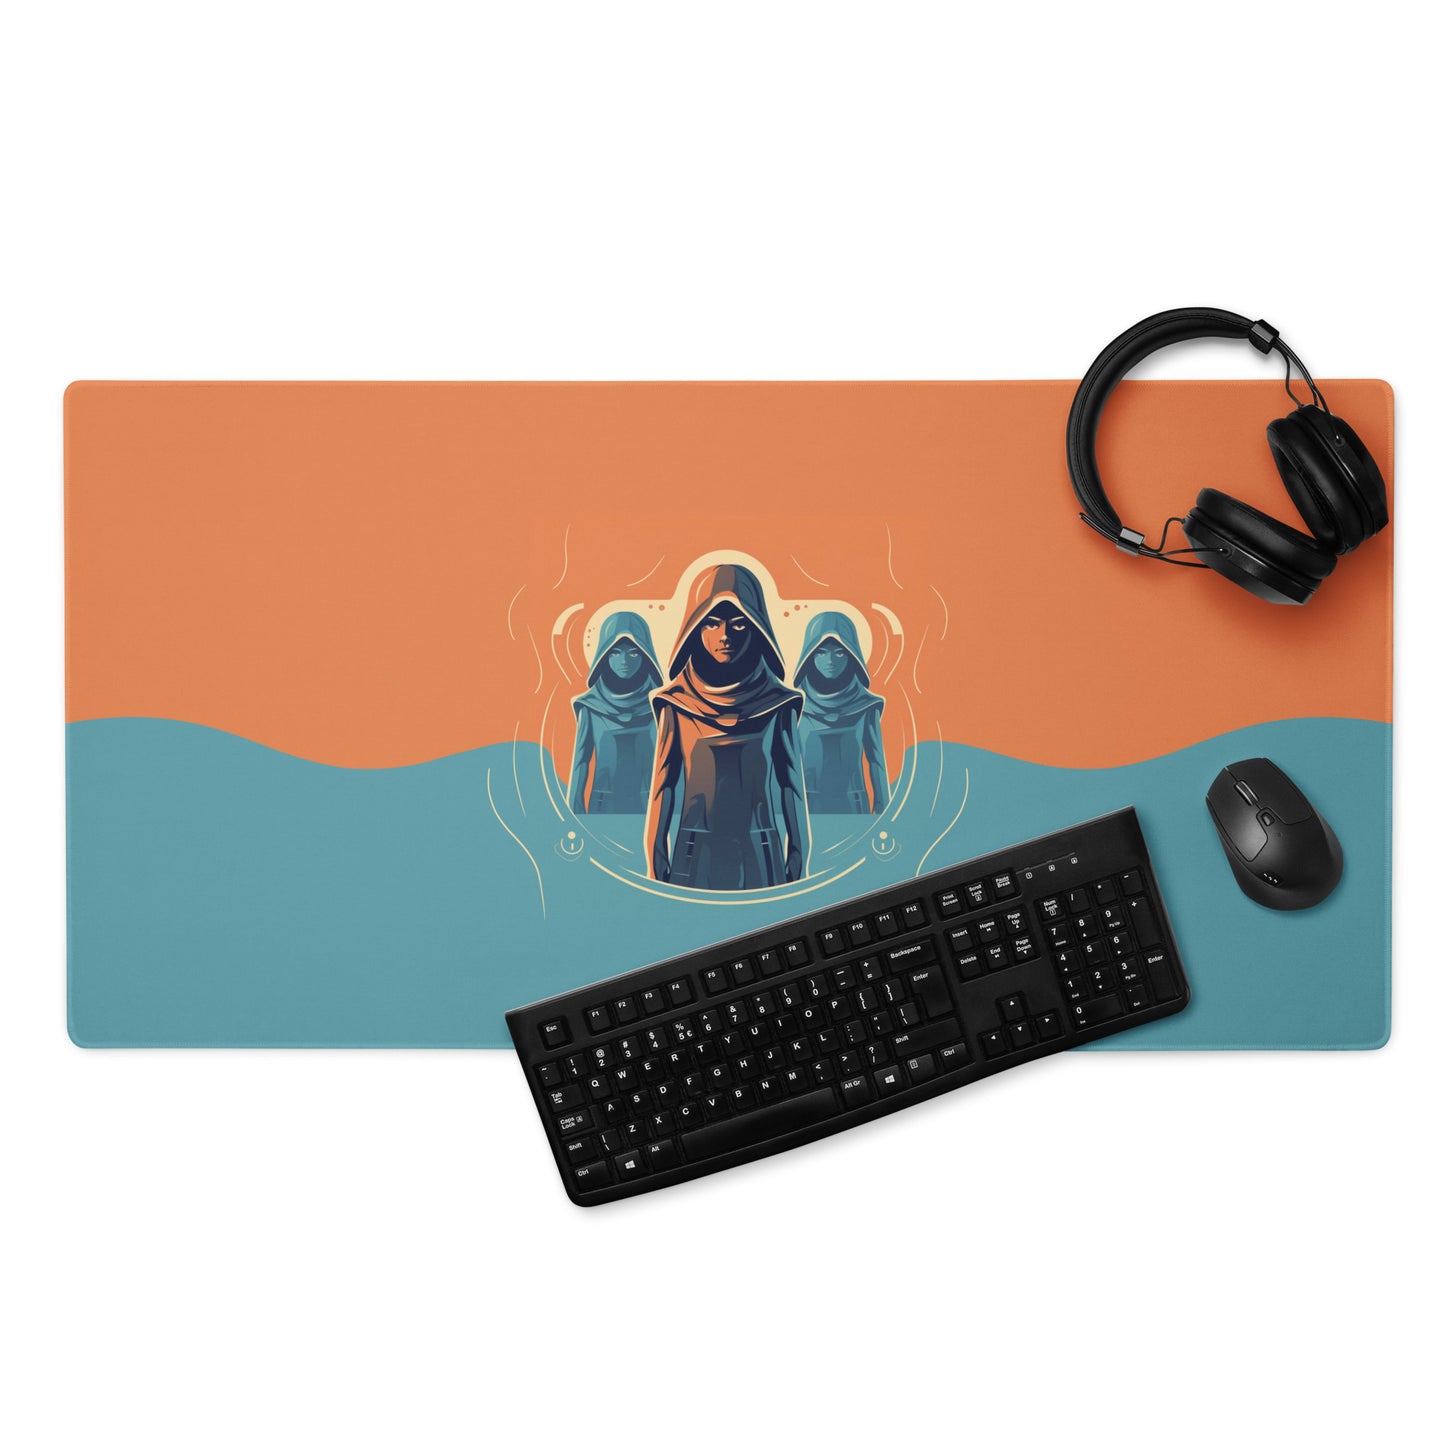 A 36" x 18" orange and blue desk pad with three robed figures. With a keyboard, mouse, and headphones sitting on it.